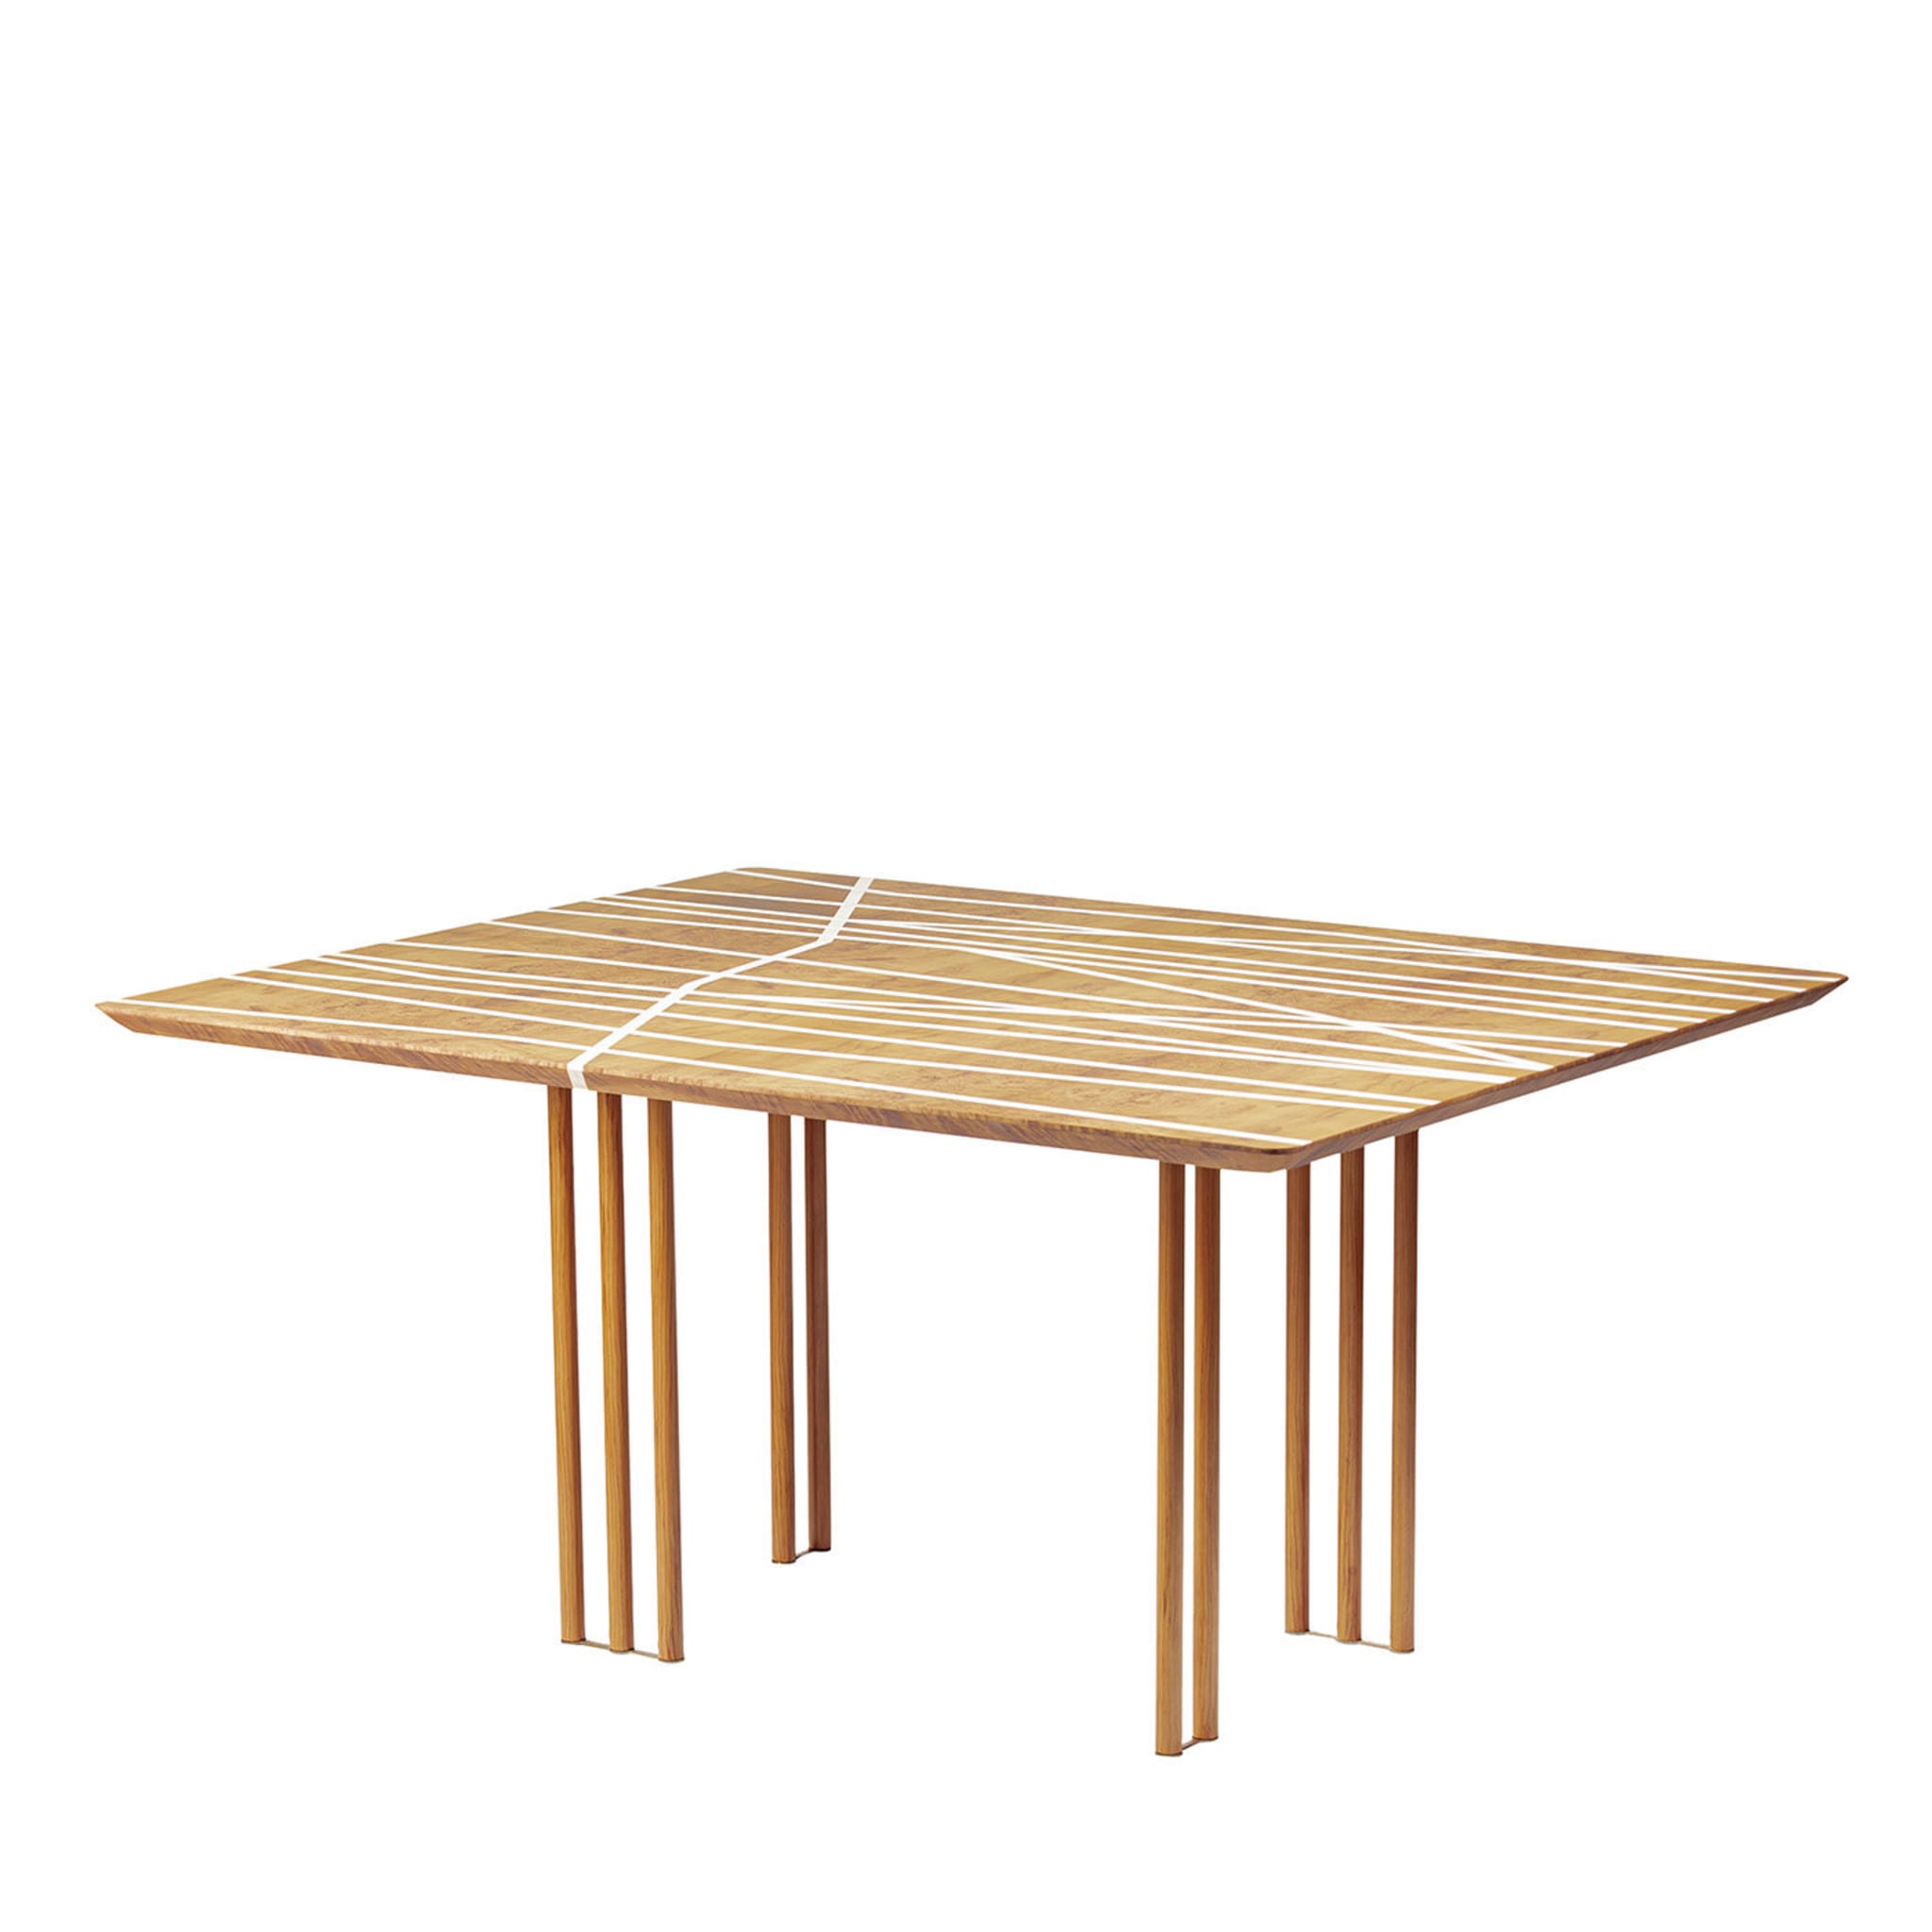 Foresta Table by Stefano Trapani - Main view